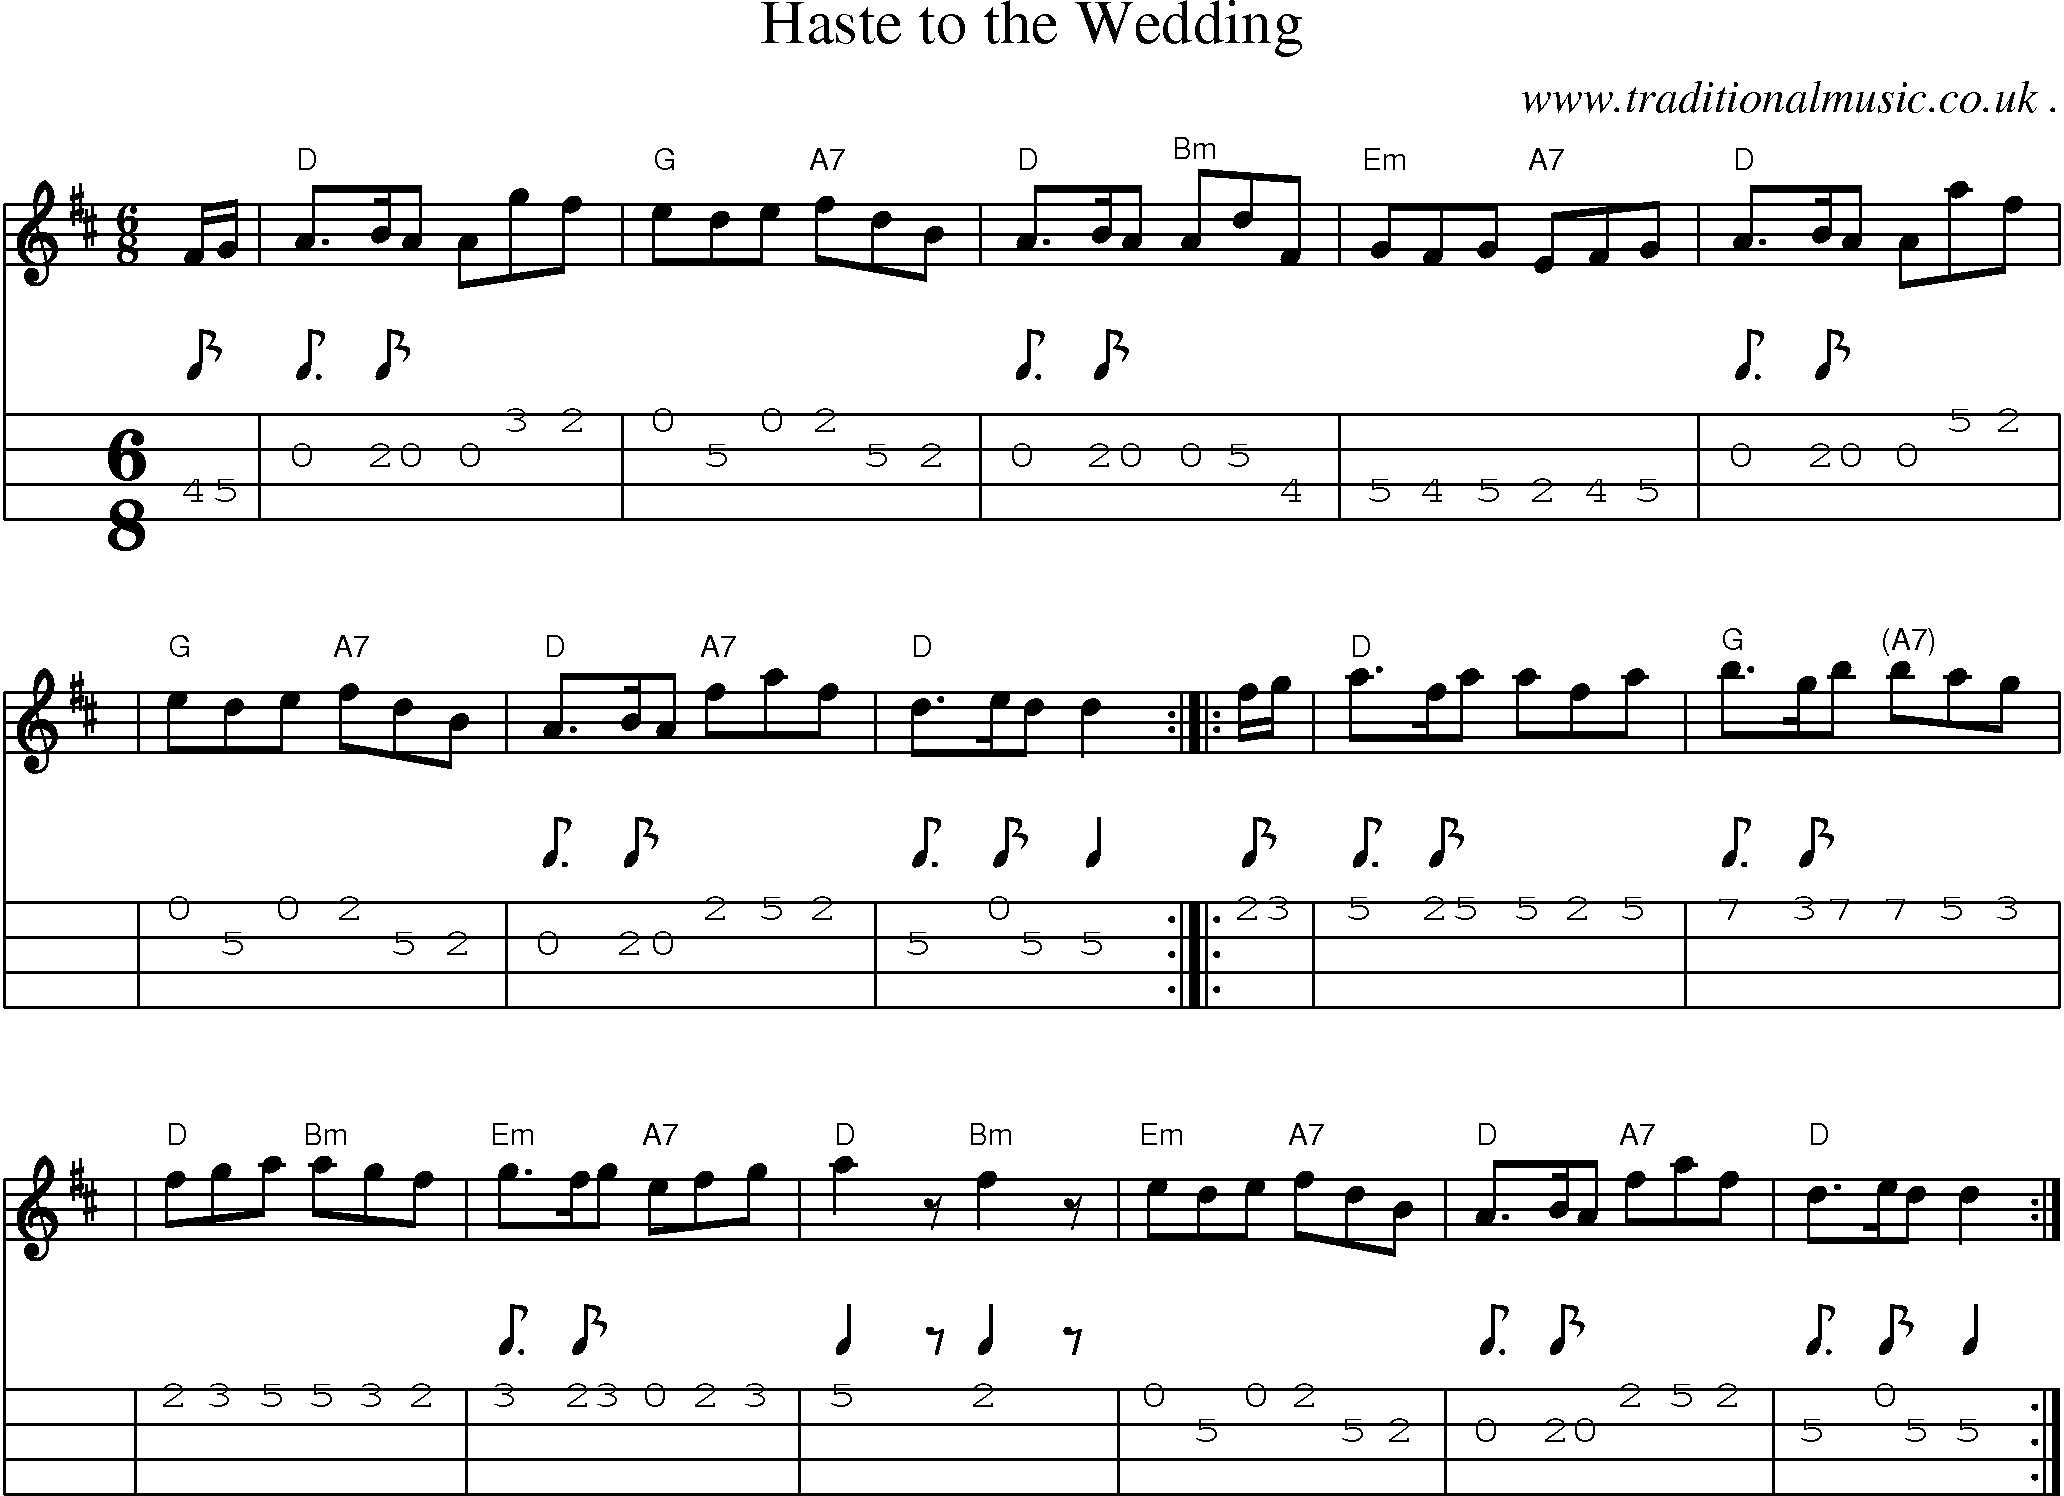 Sheet-music  score, Chords and Mandolin Tabs for Haste To The Wedding